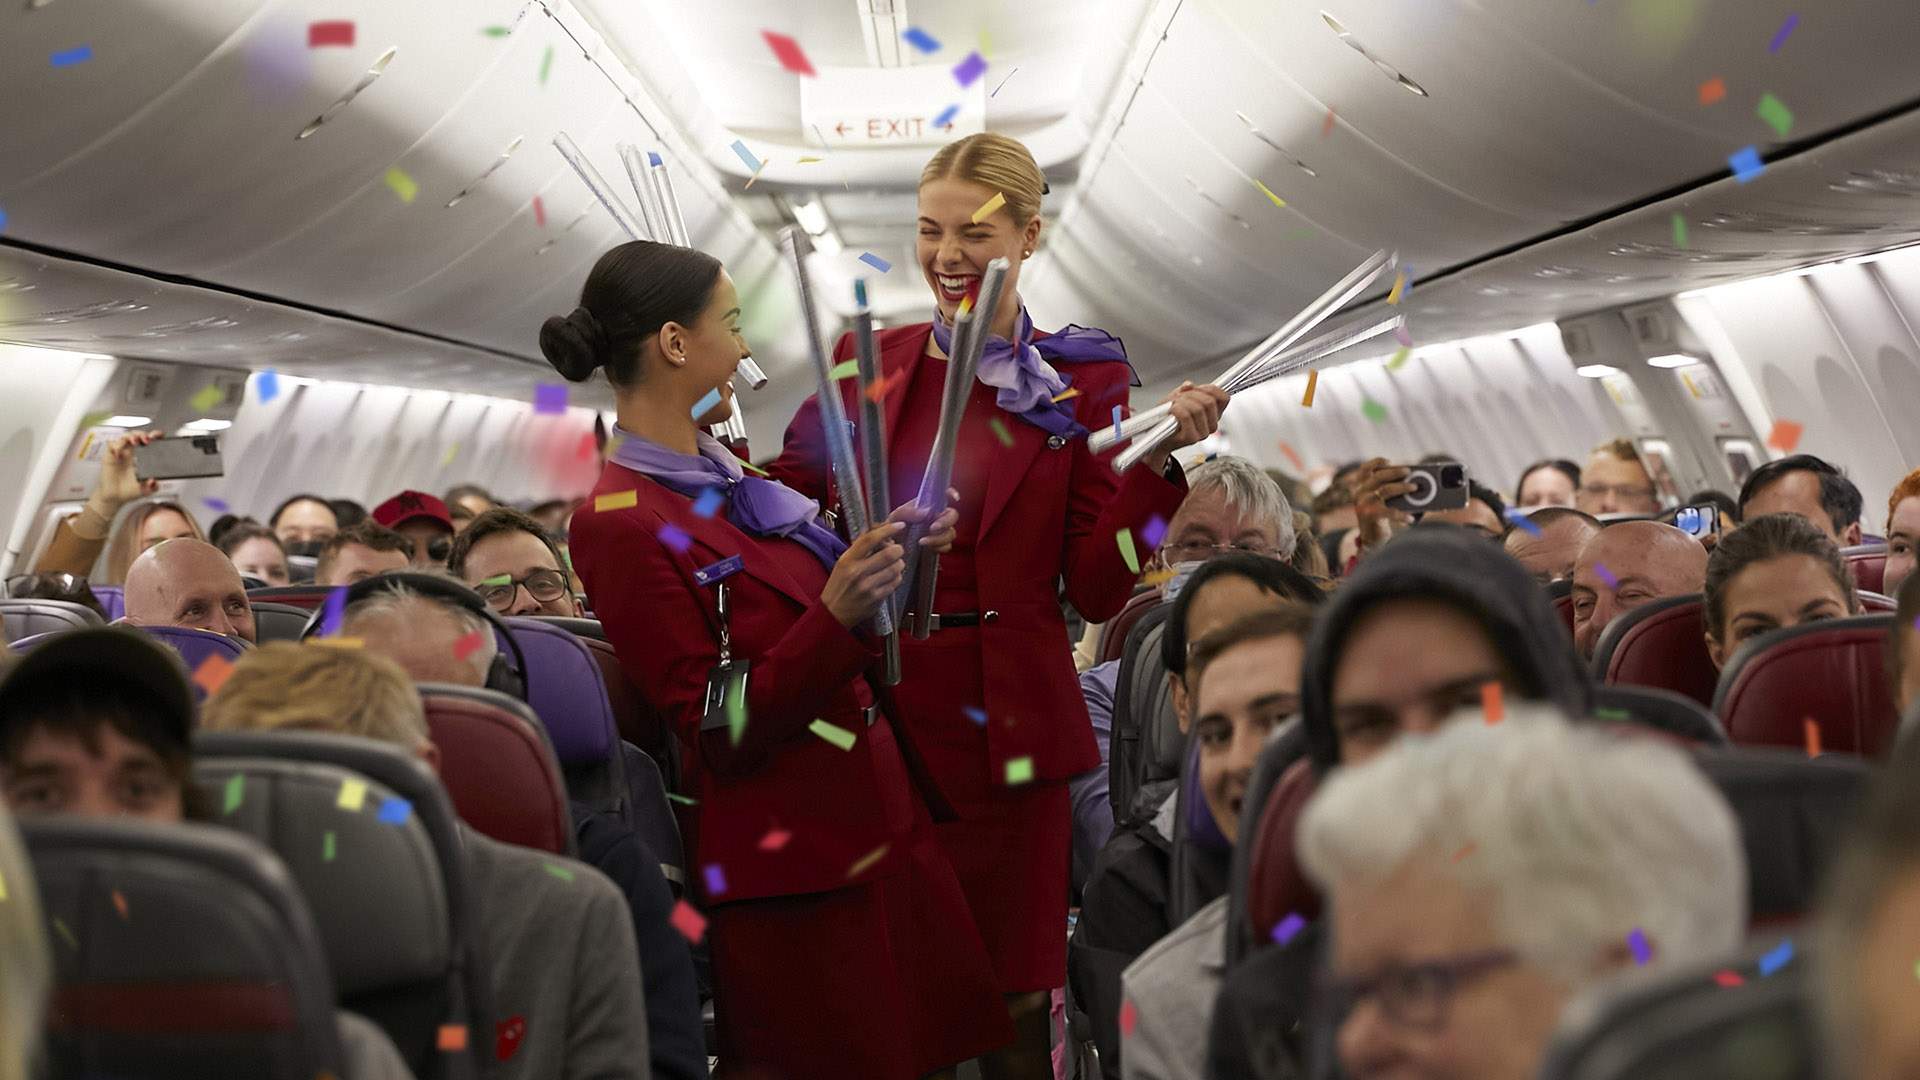 Virgin's New Middle Seat Lottery Is Giving Prizes to Folks Stuck in Everyone's Least-Favourite Spot